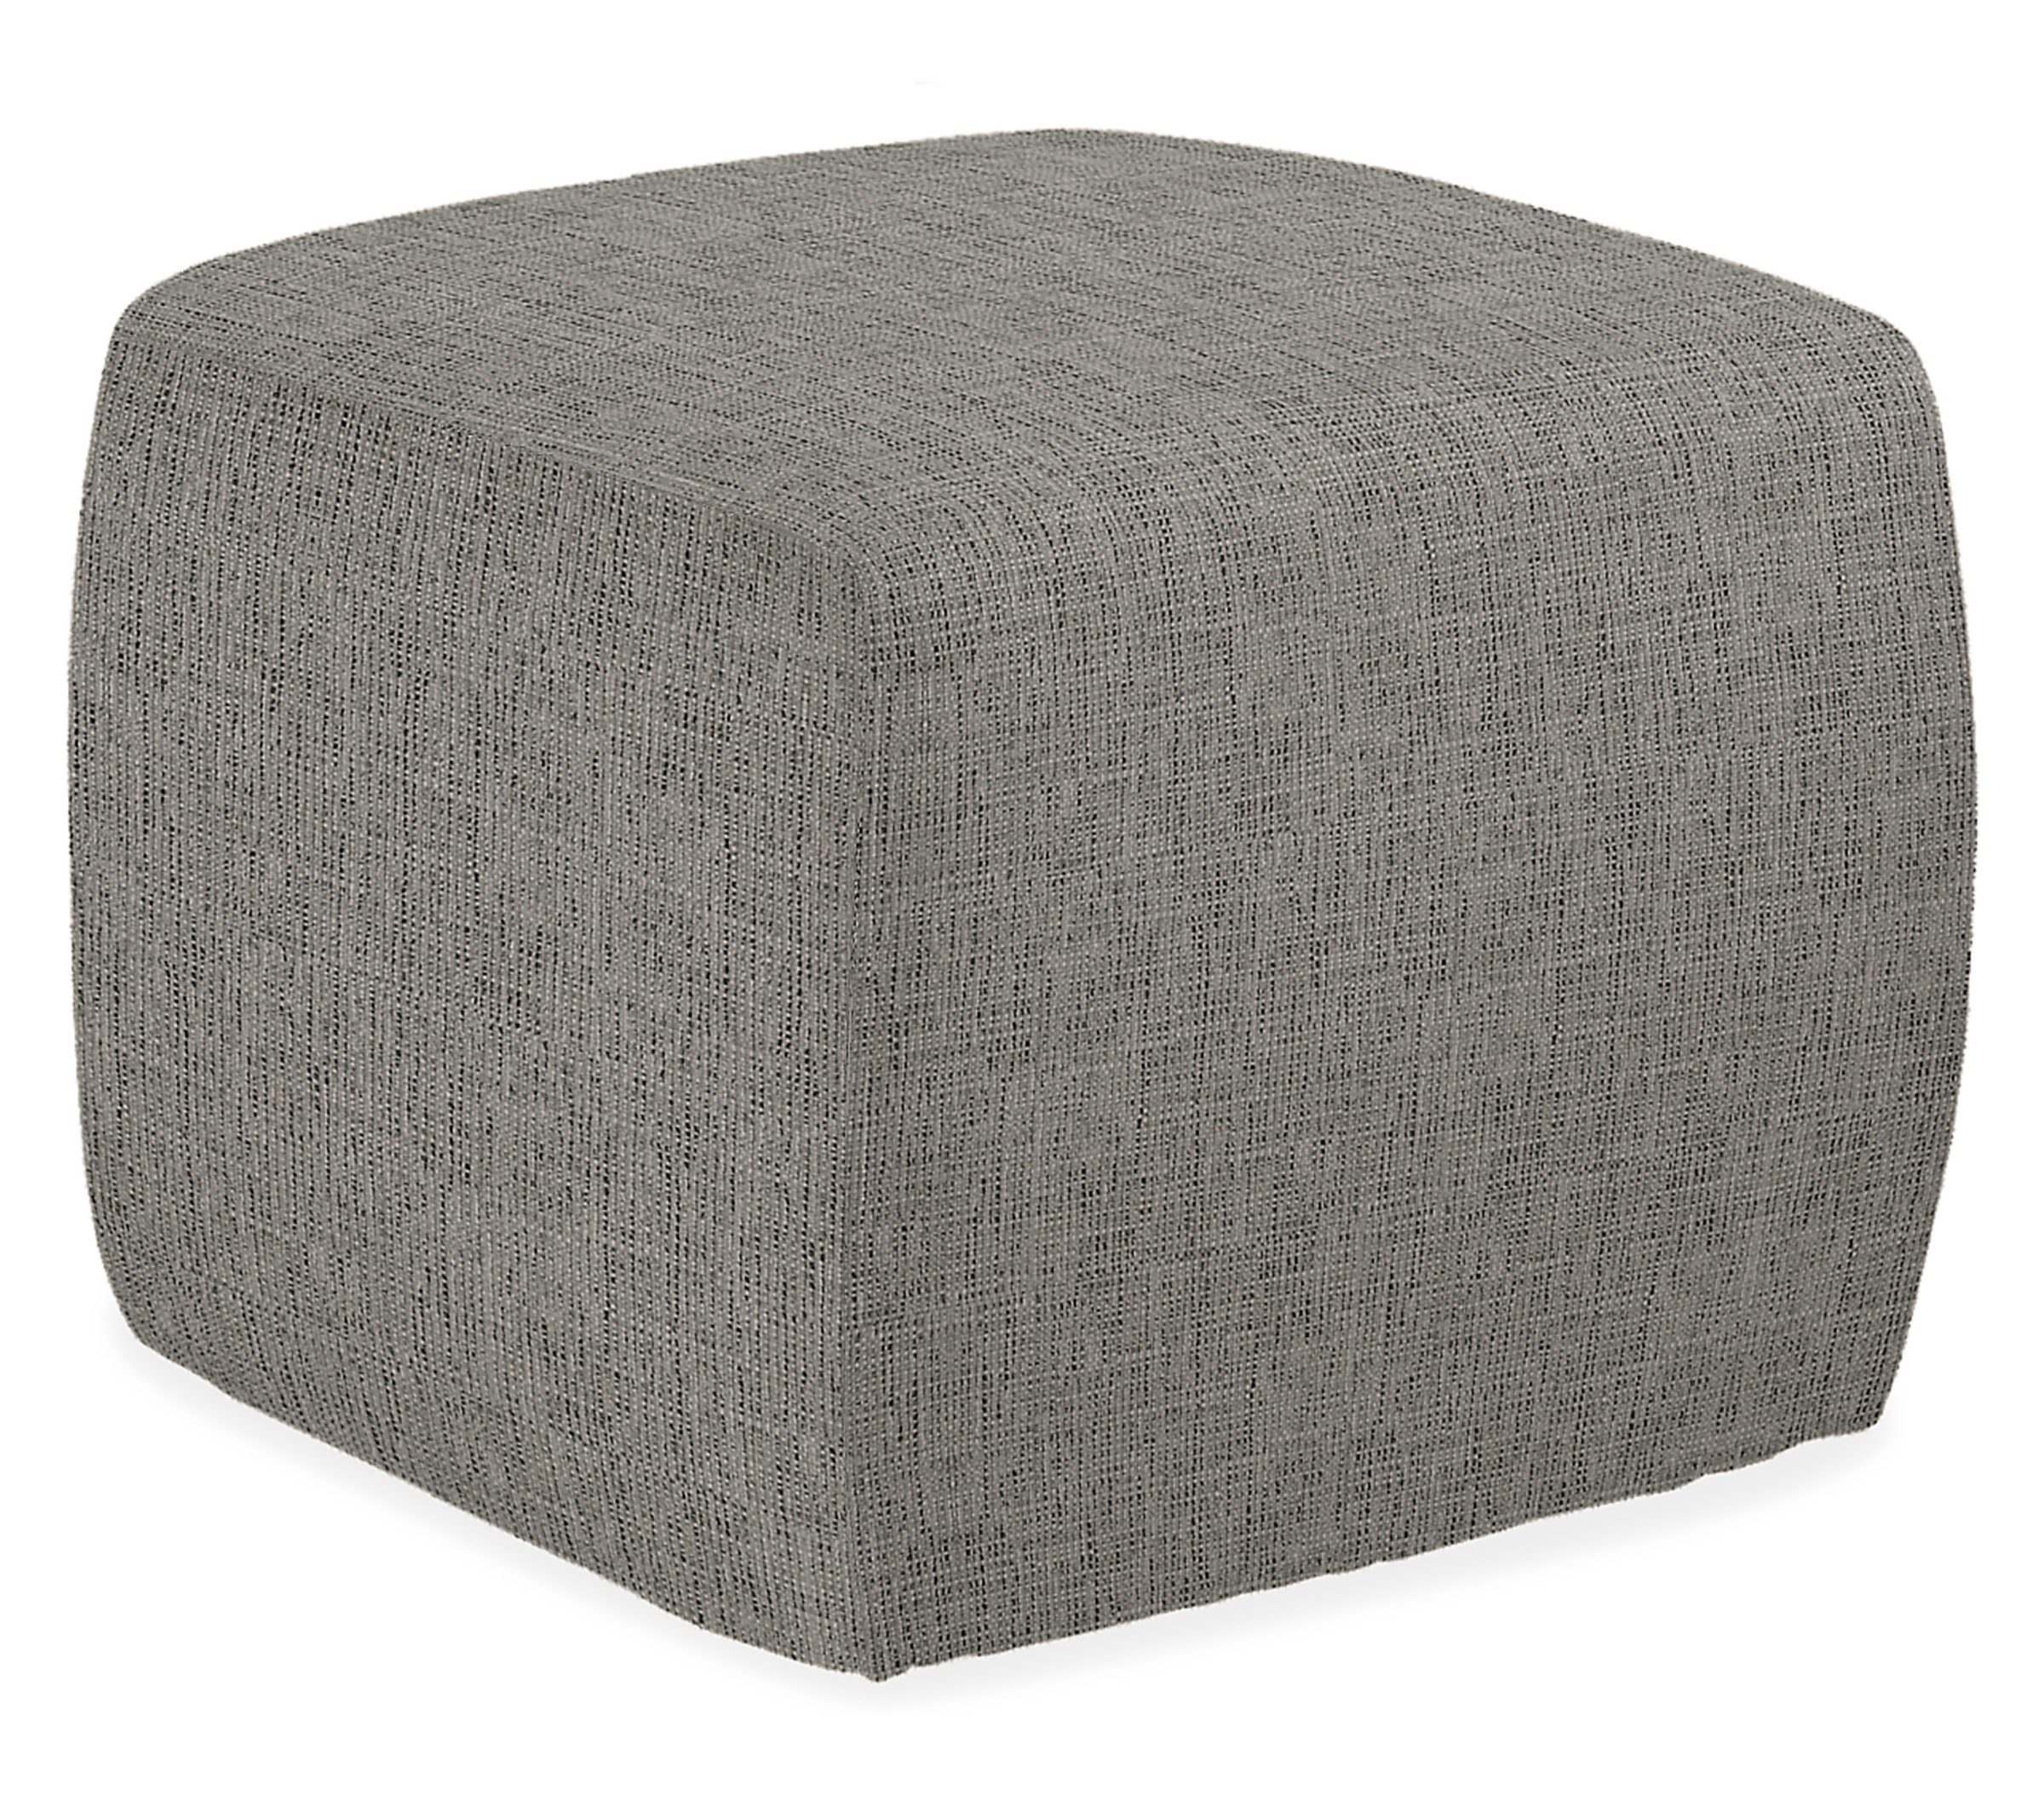 Boyd 21w 21d 18h Square Ottoman in Phipps Charcoal